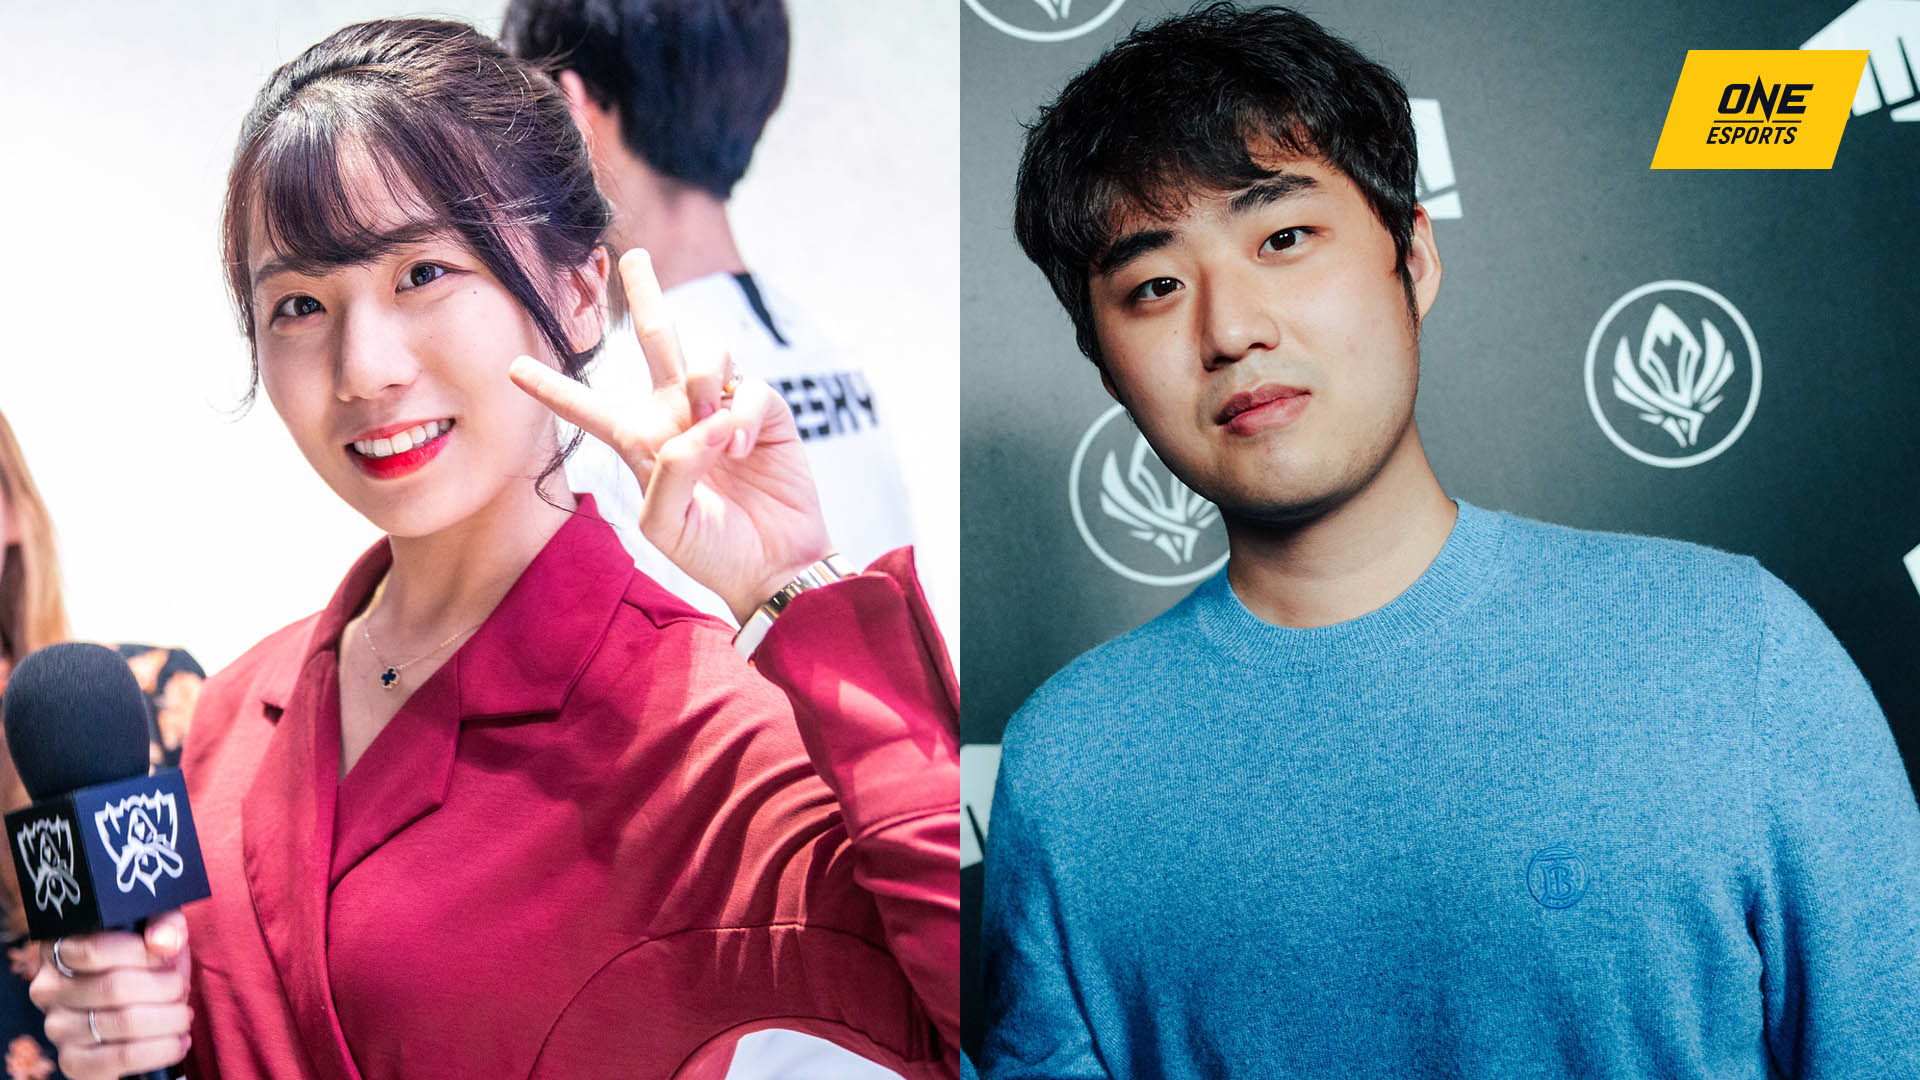 Let Luftpost USA T1 Bang on fiancee Jeesun: 'She gives me stability, she's the pillar of my  life' | ONE Esports